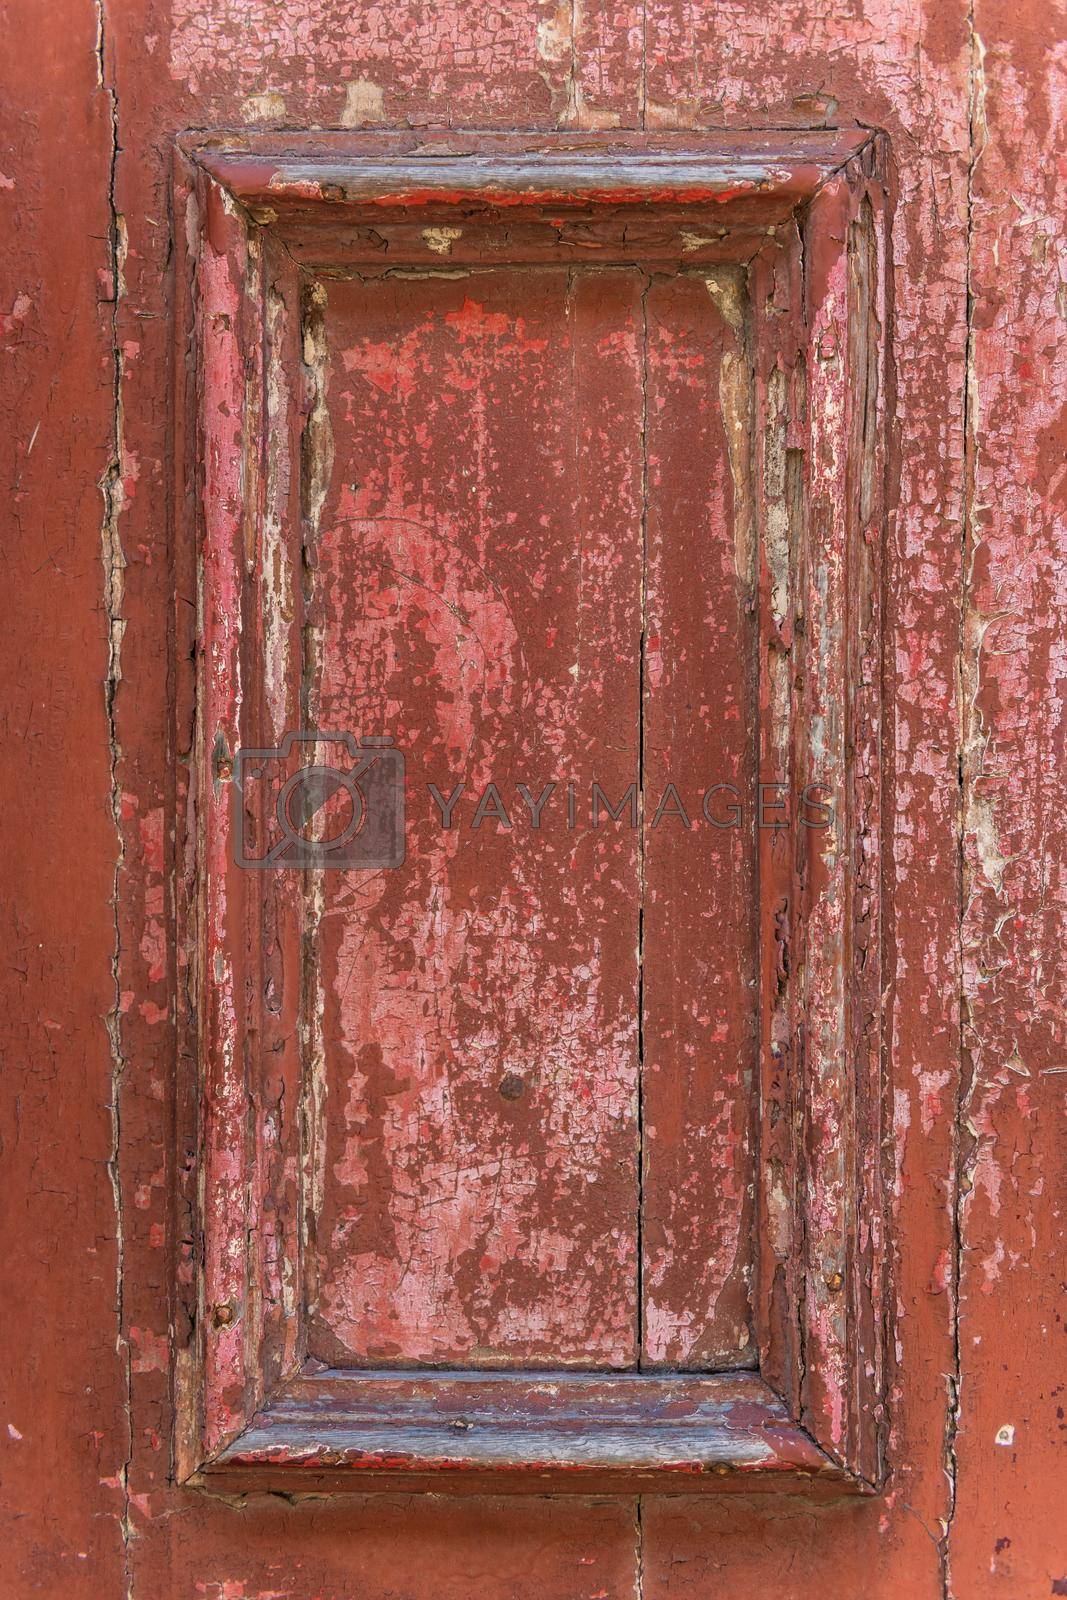 Frame part of a old wooden door painted on red.